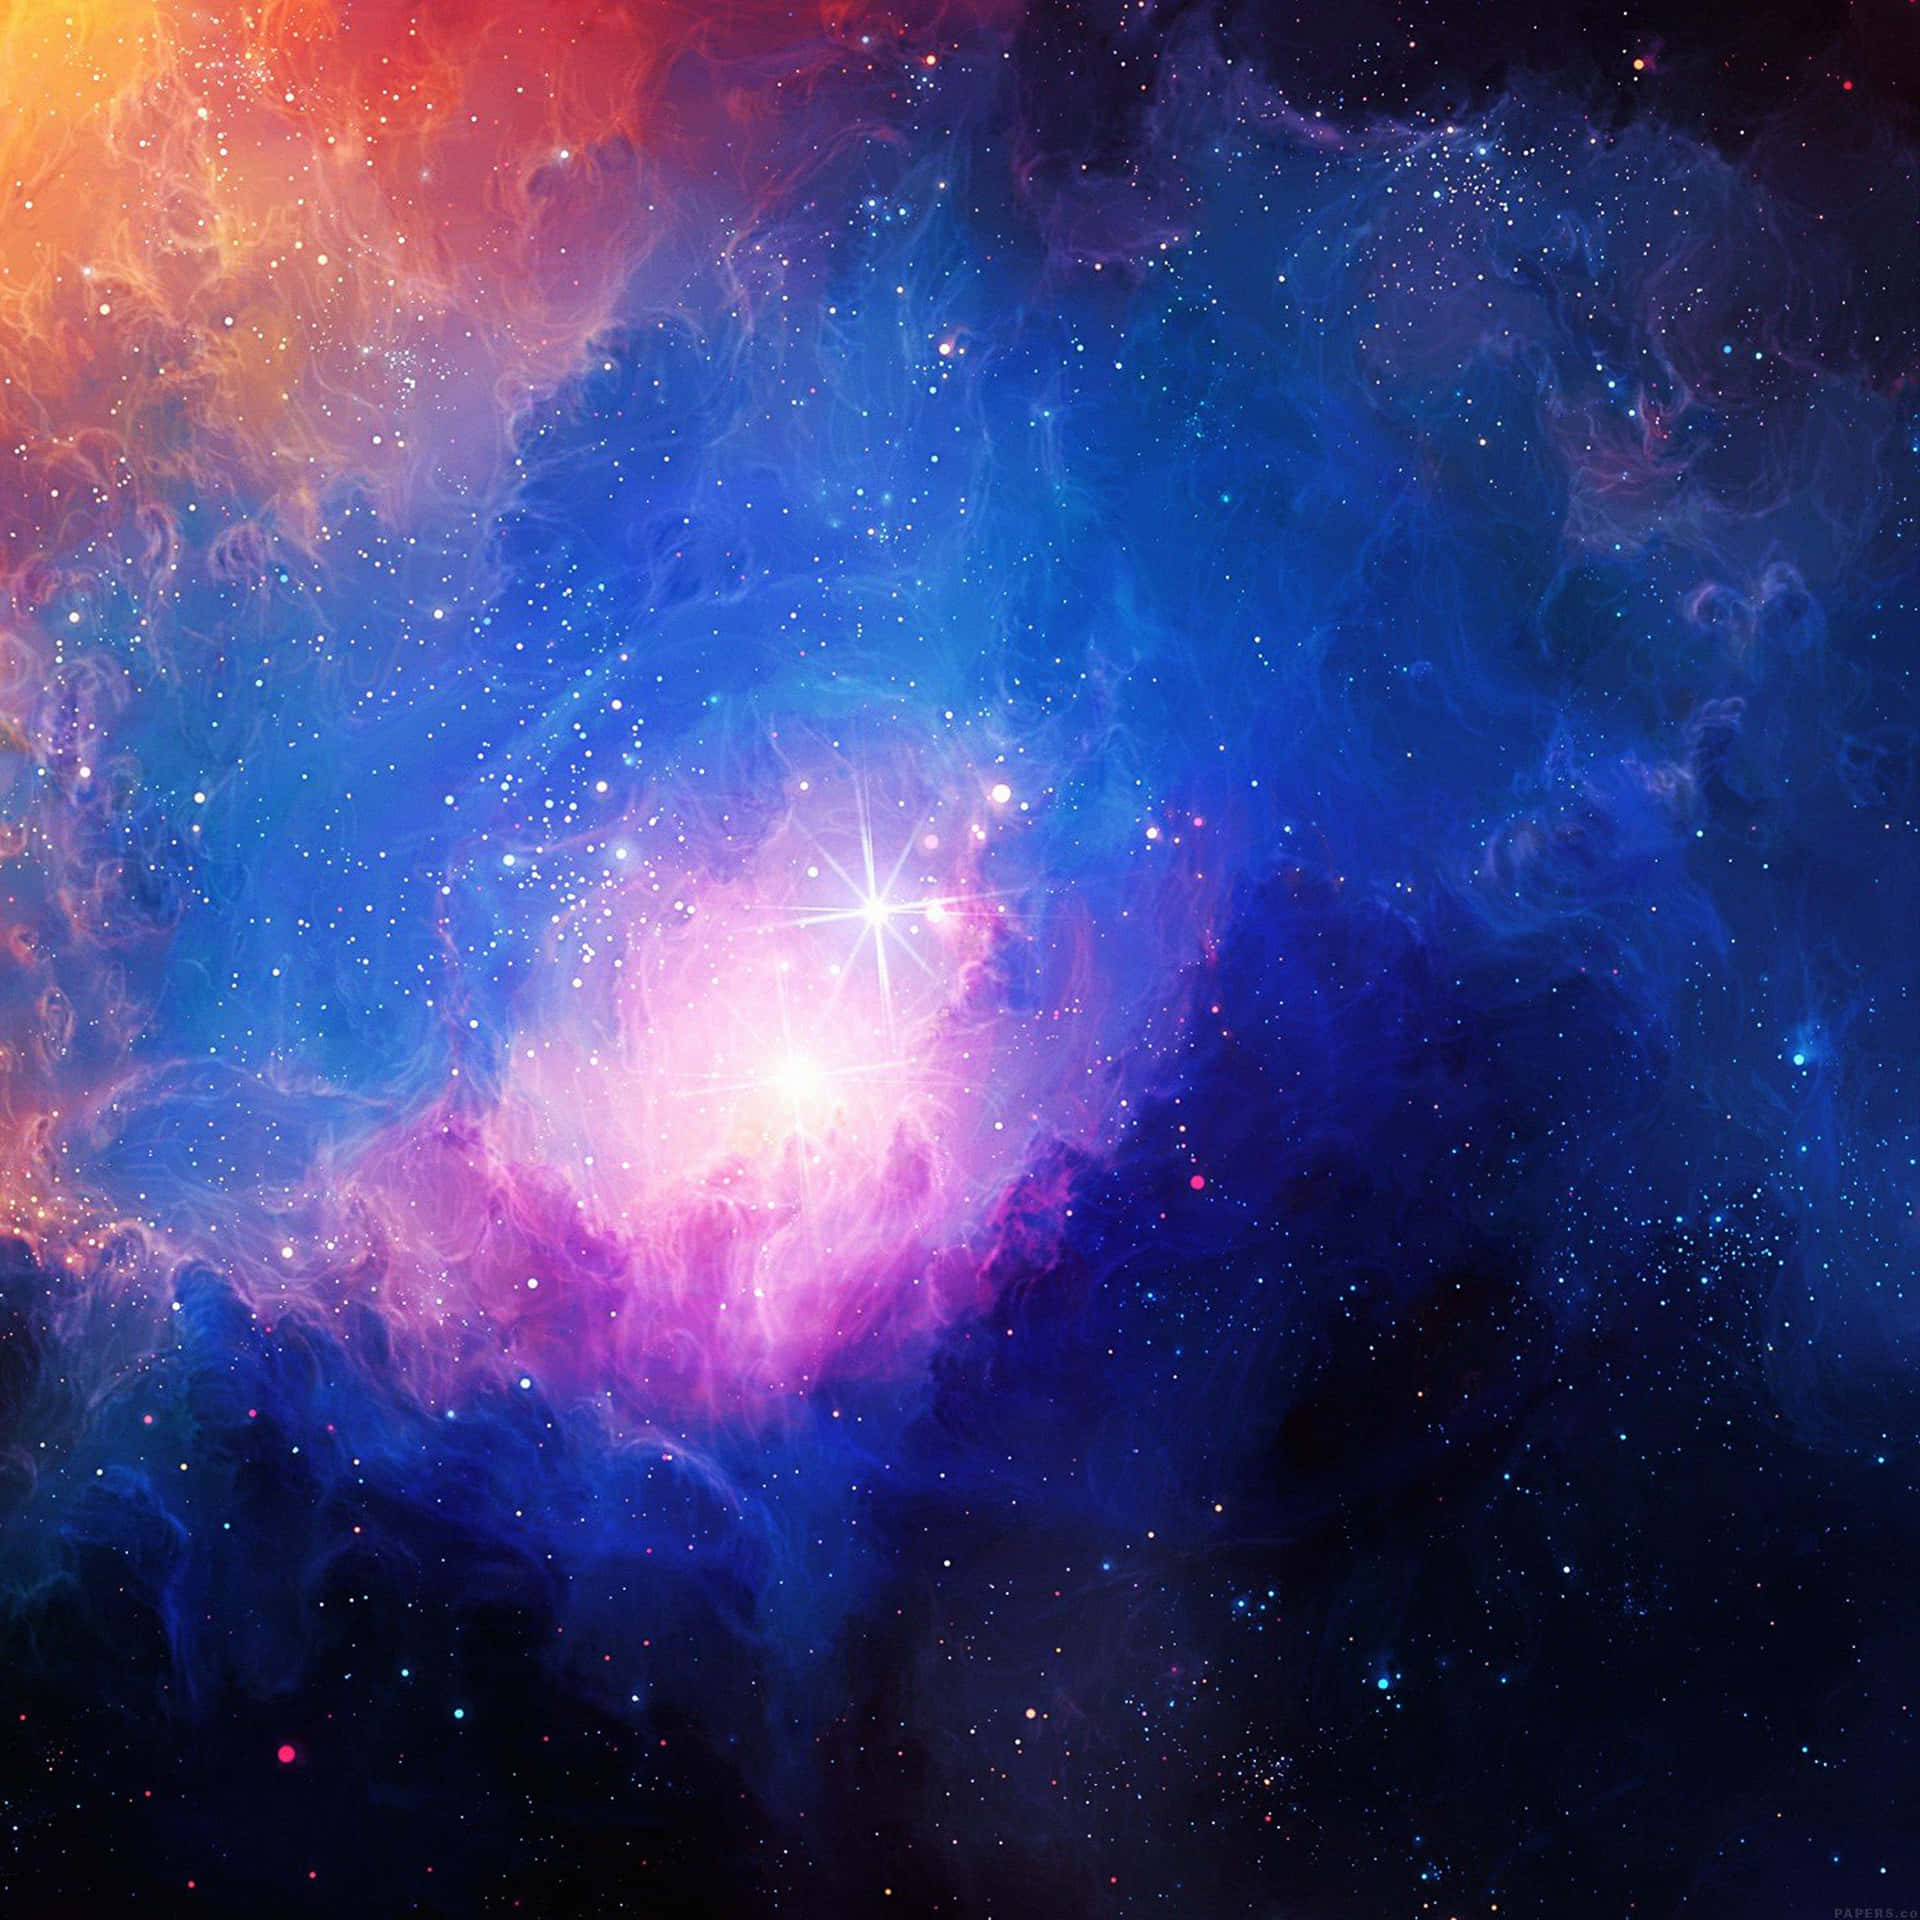 Explore the galaxies in a dreamy night sky. Wallpaper